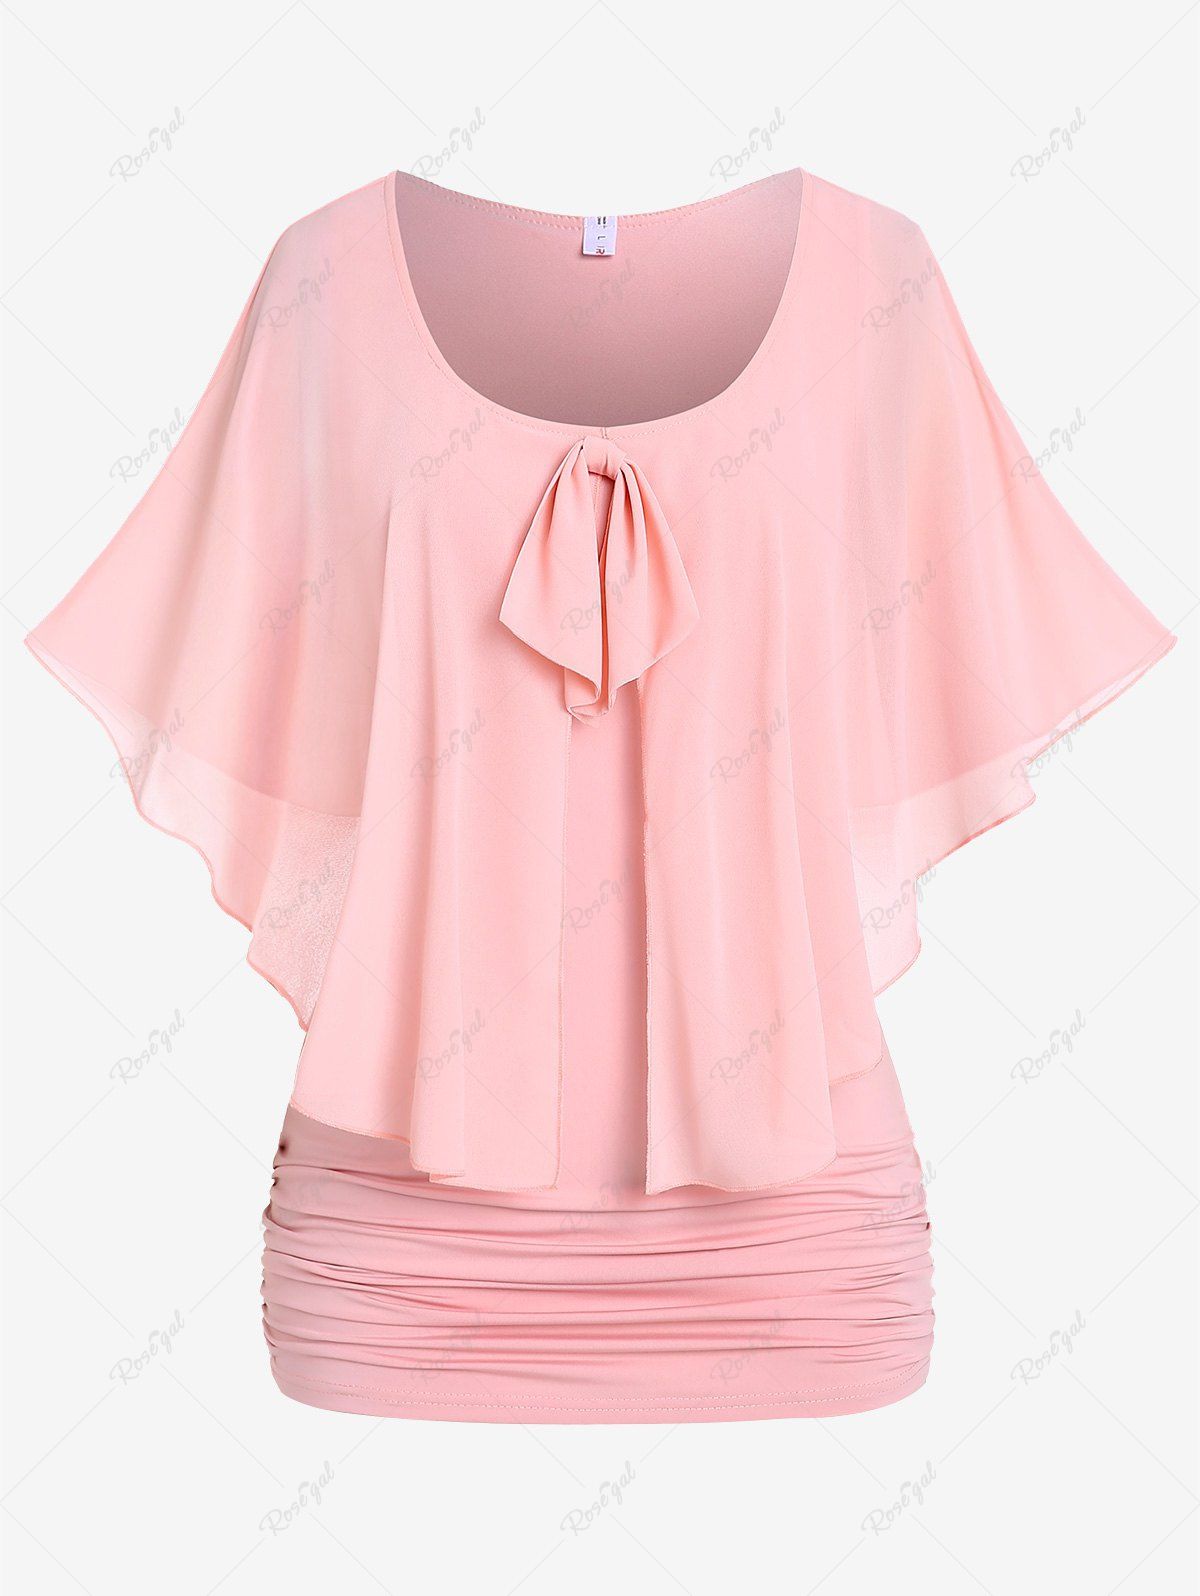 Outfits Plus Size Mesh Overlay Bowknot Capelet T-shirt  